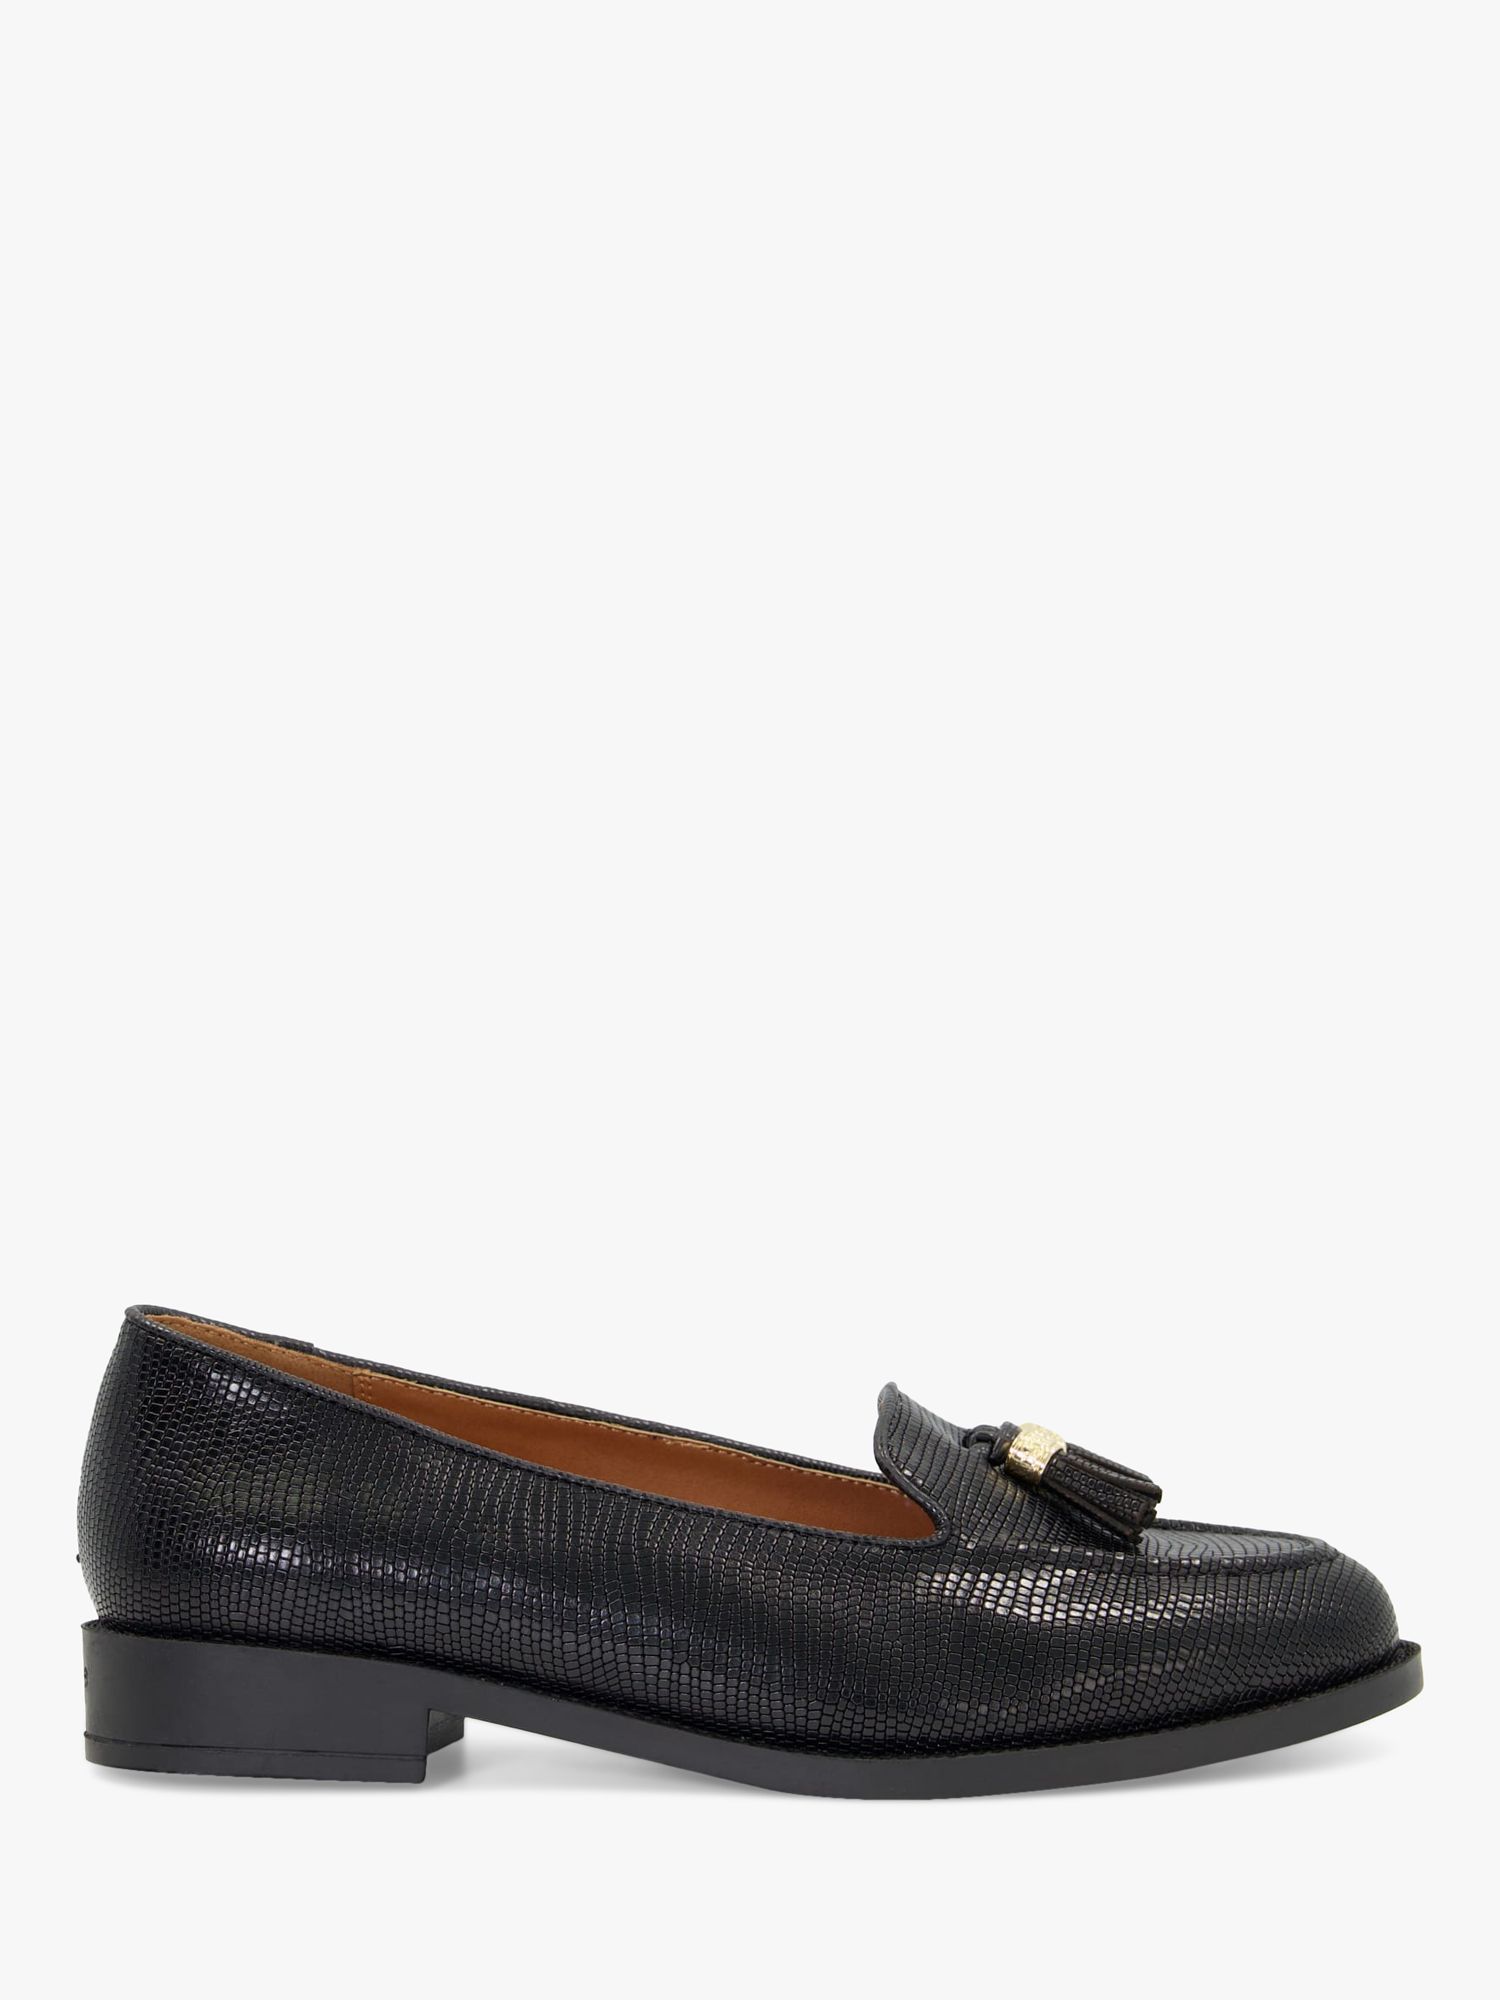 Dune Wide Fit Global Leather Tassel Loafers, Black at John Lewis & Partners